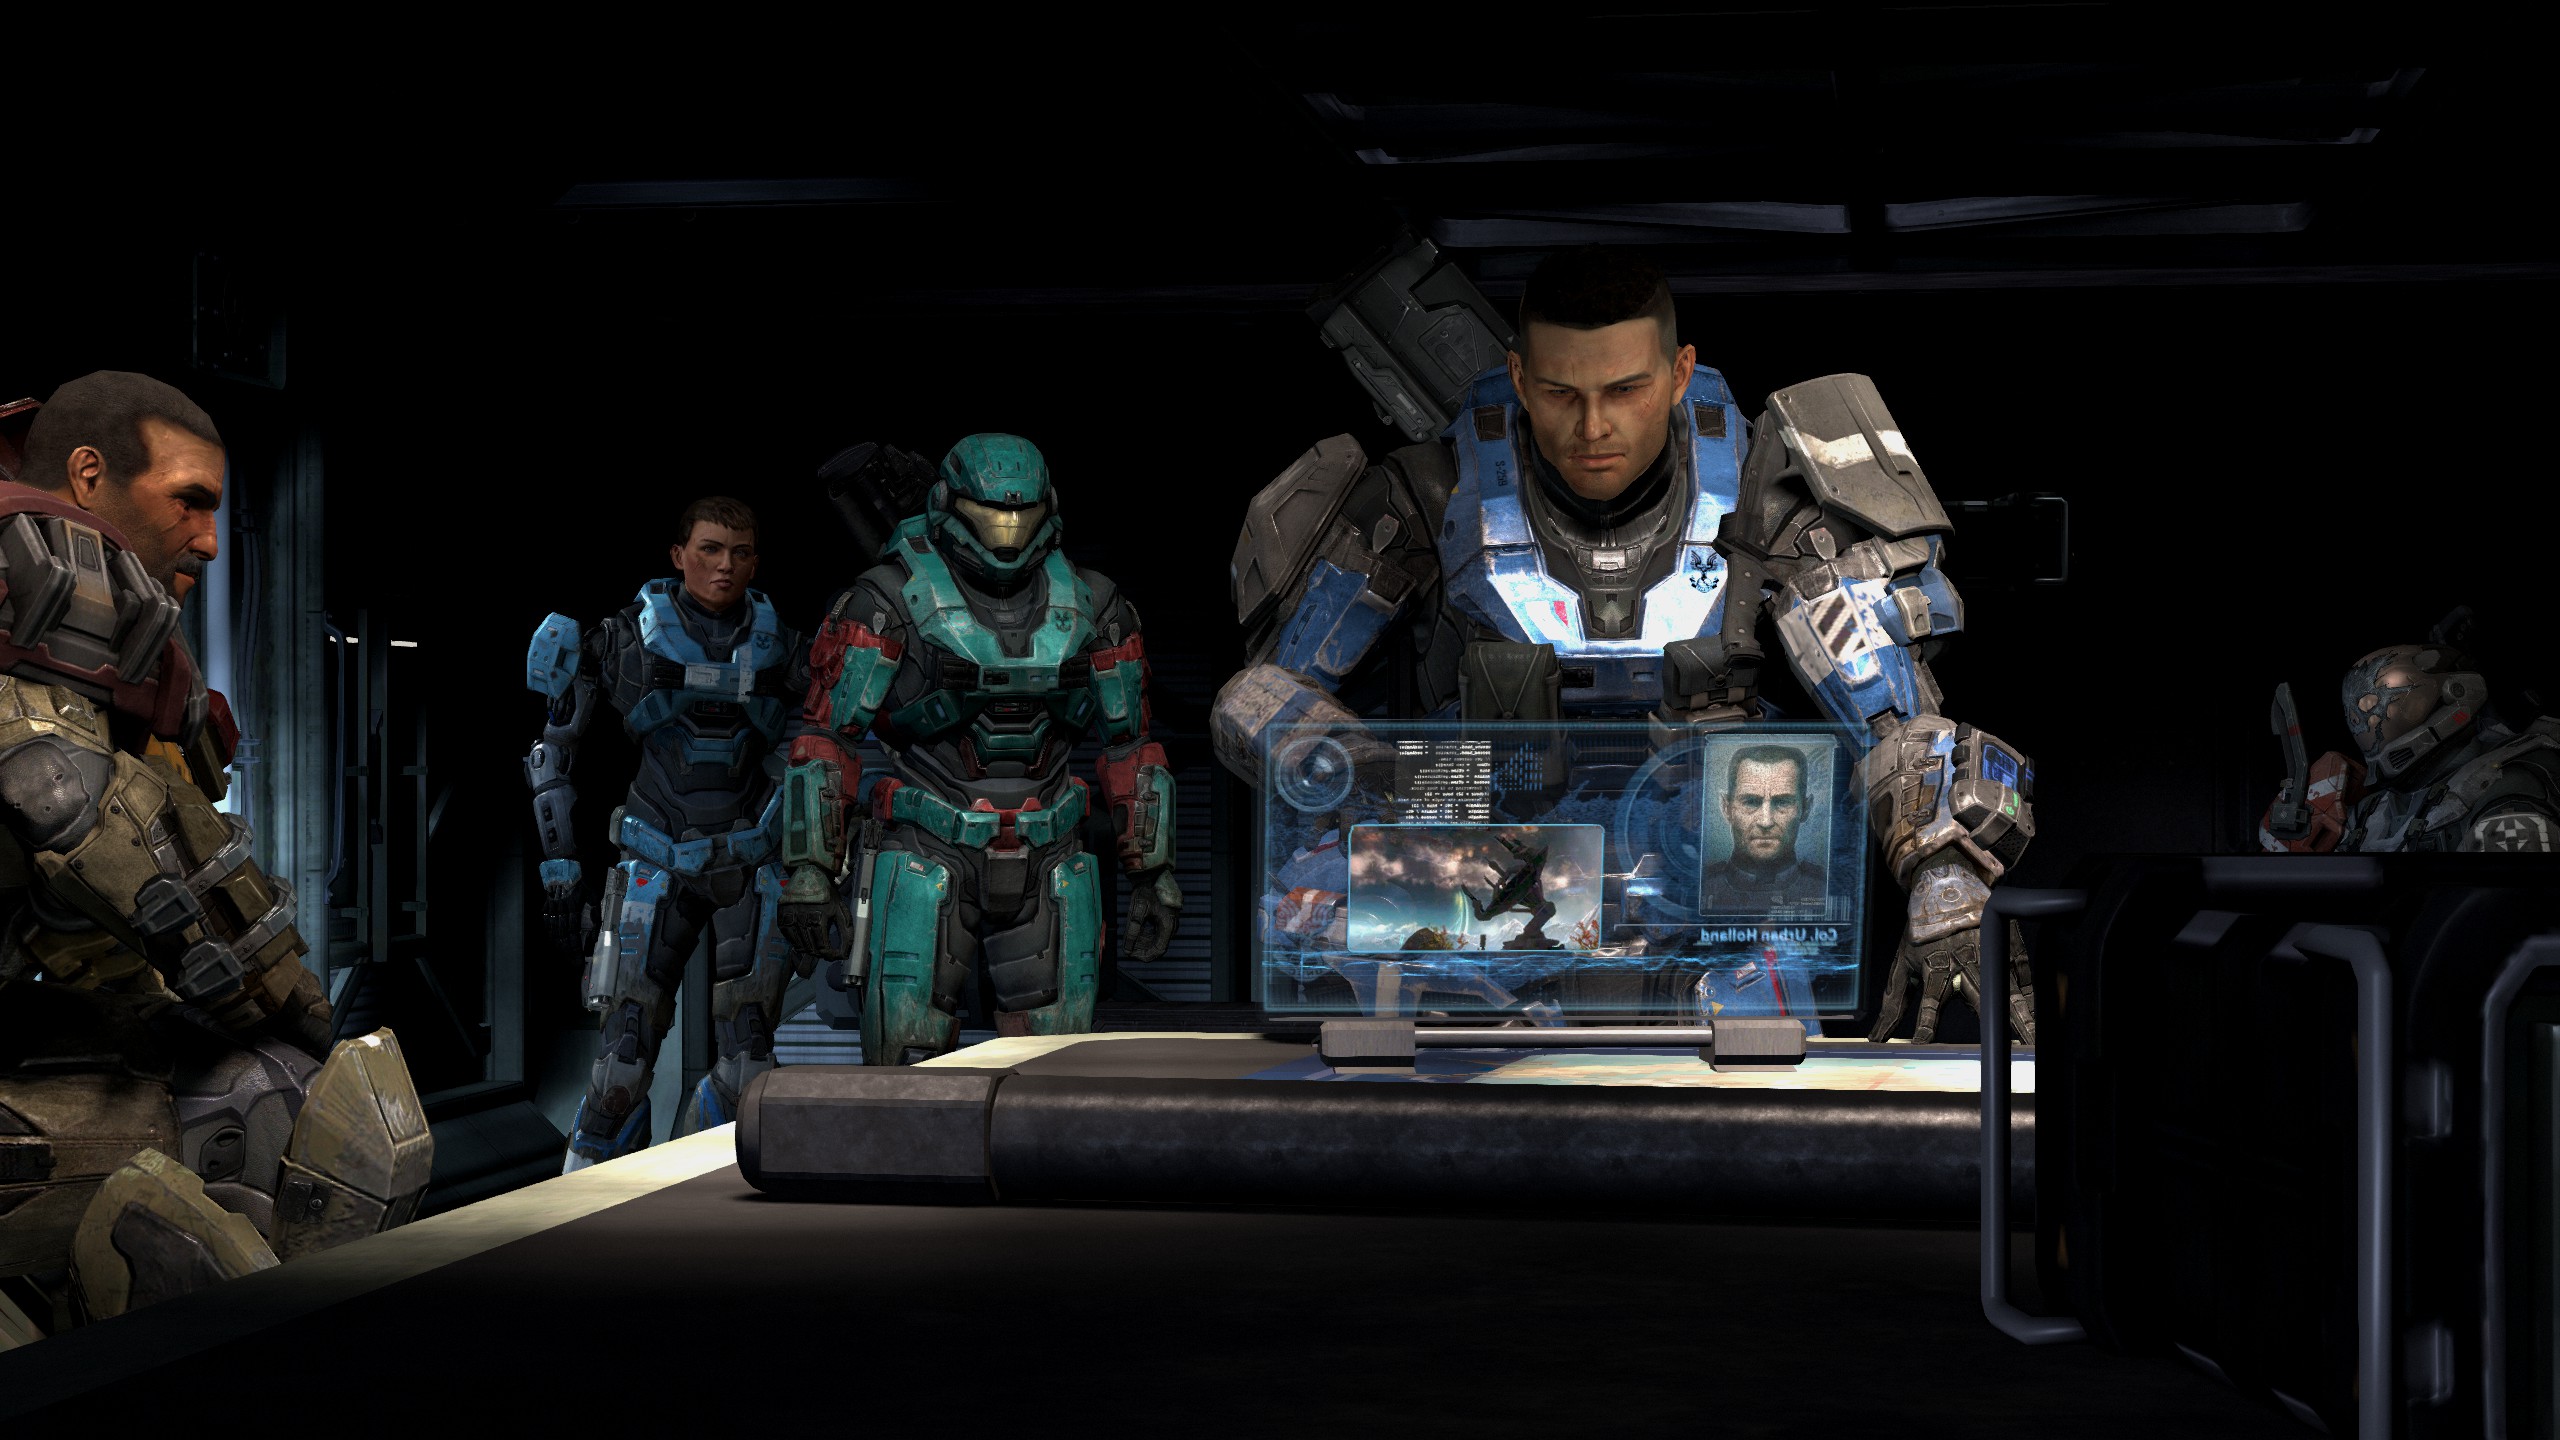 Halo Reach PC Hits Over 150K Concurrent Players on Steam; Over 100K In 1  Hour After Launch